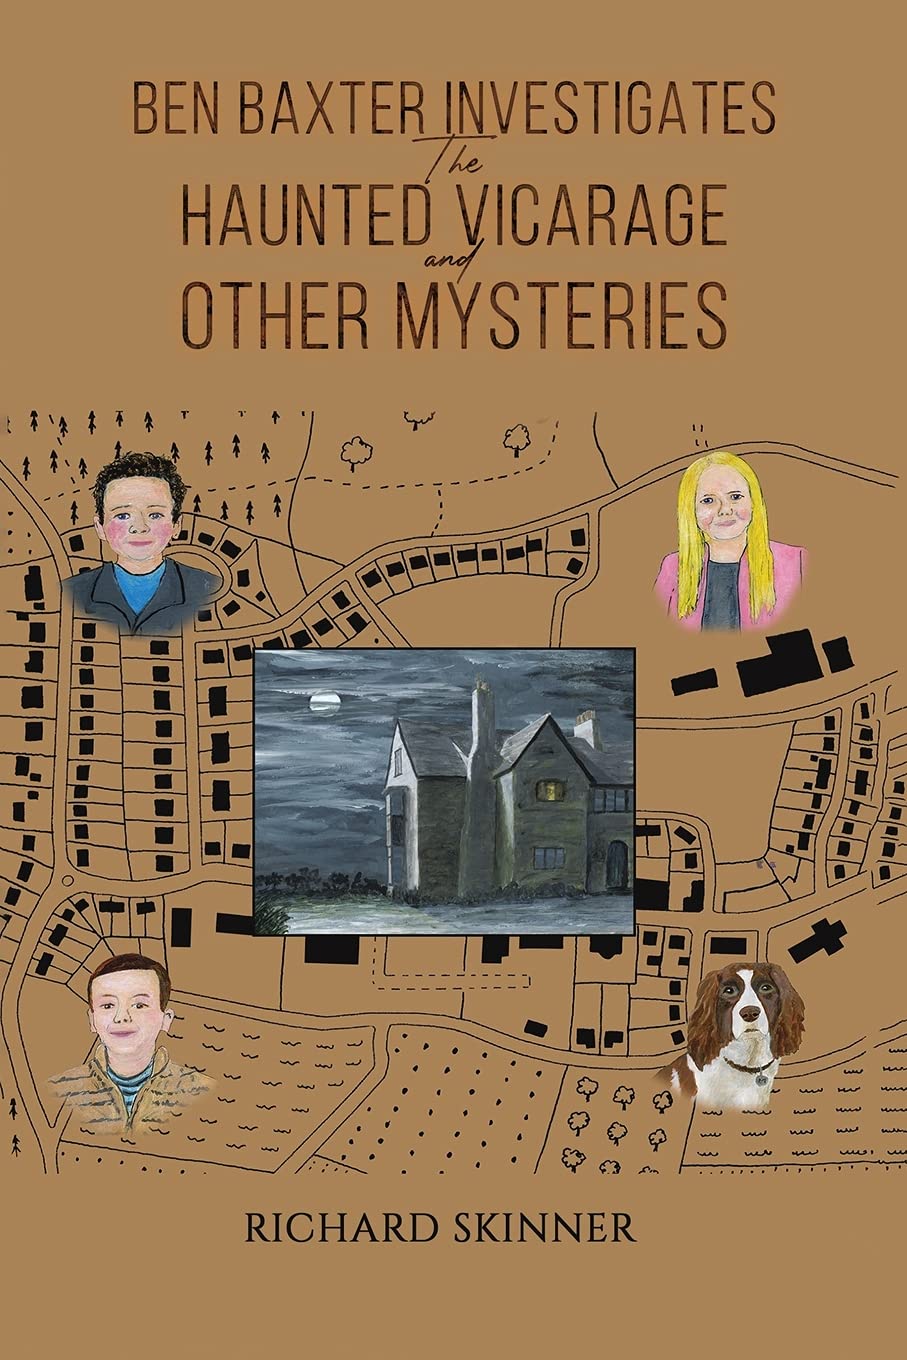 Ben Baxter Investigates the Haunted Vicarage and Other Mysteries